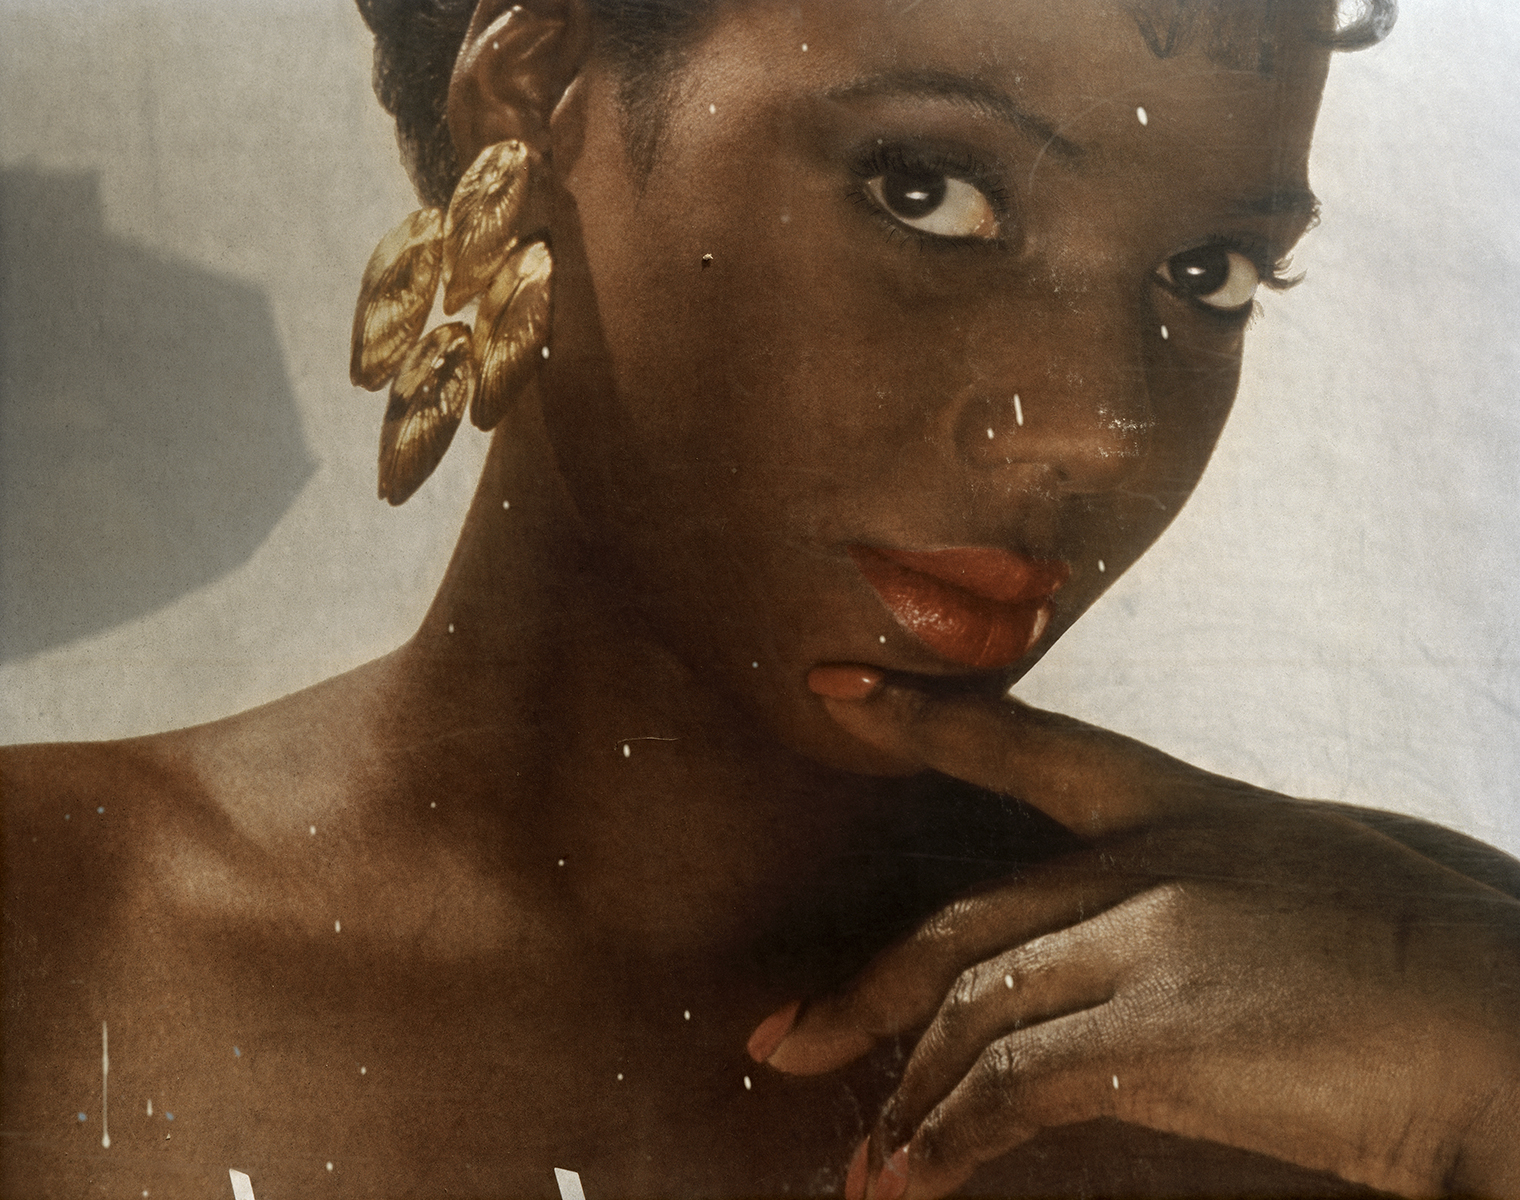 Photograph of an advertisement depicting a woman with large gold earring posing with a finger held to her chin.